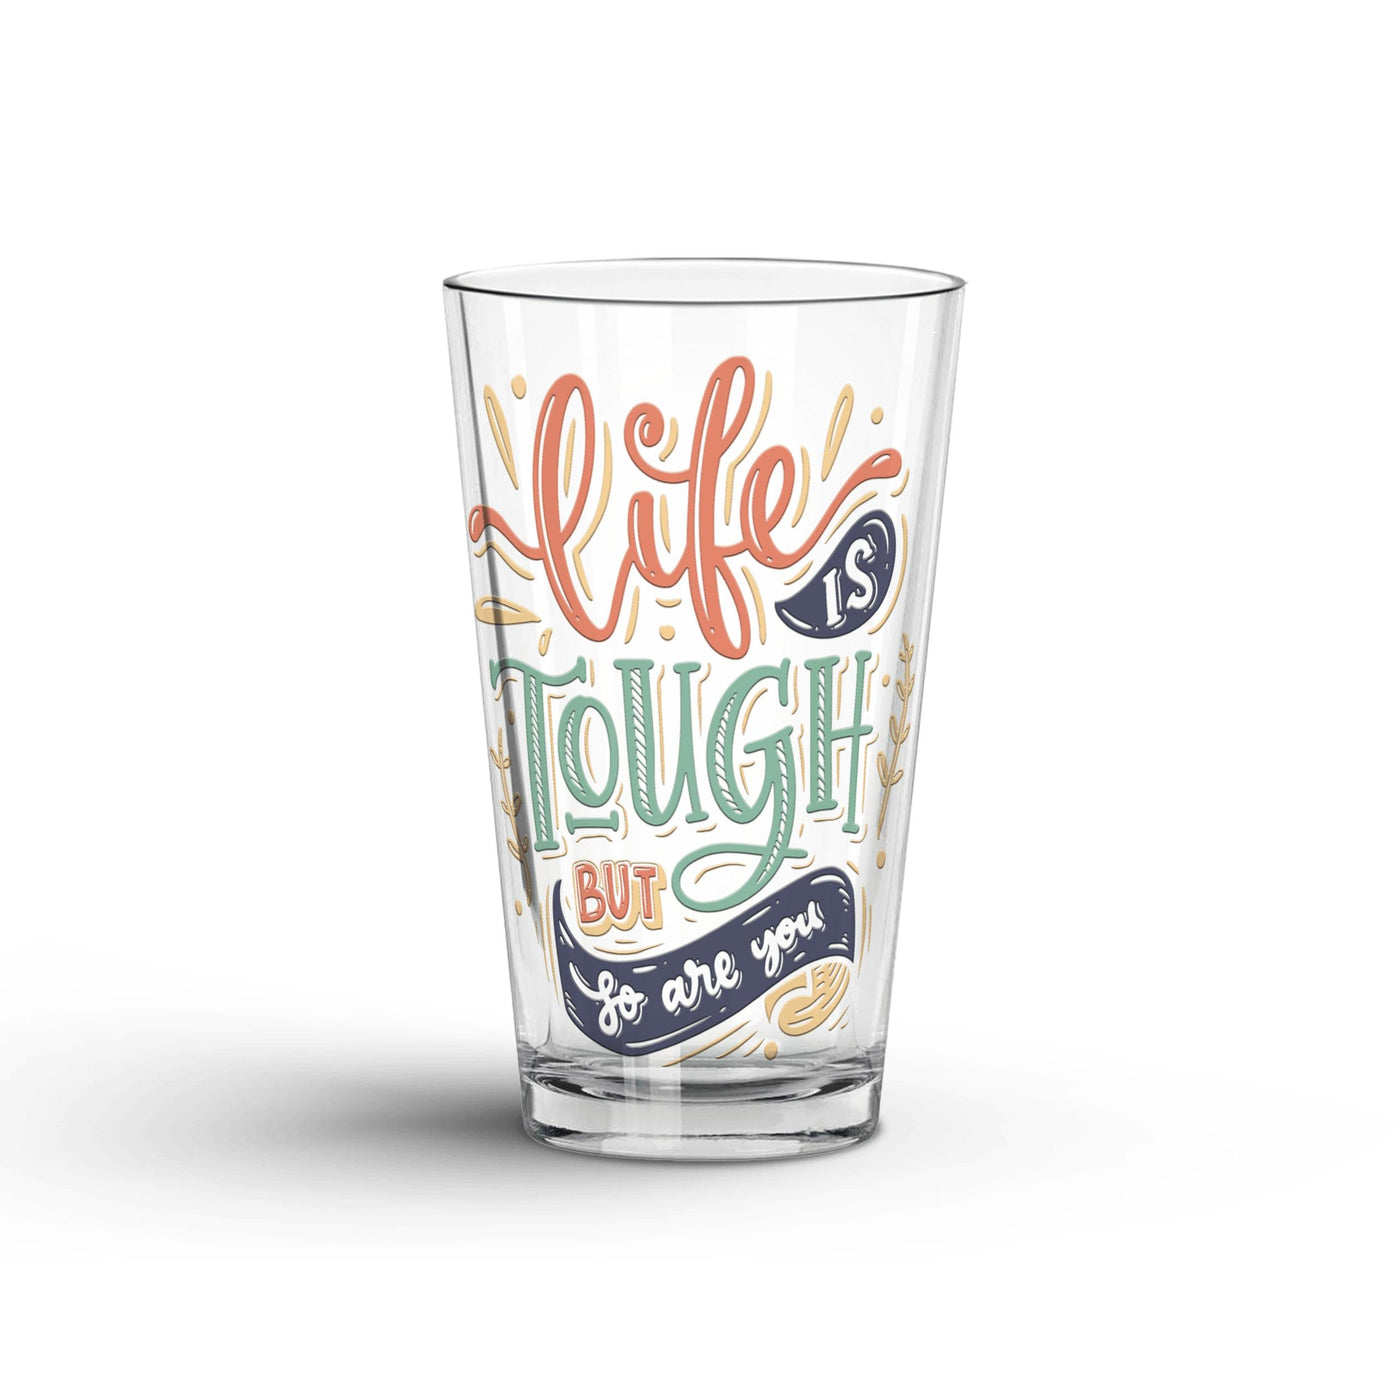 Glass Tumbler: Life Is Tough But So Are You Glass Tumbler Sam + Zoey  Sam + Zoey